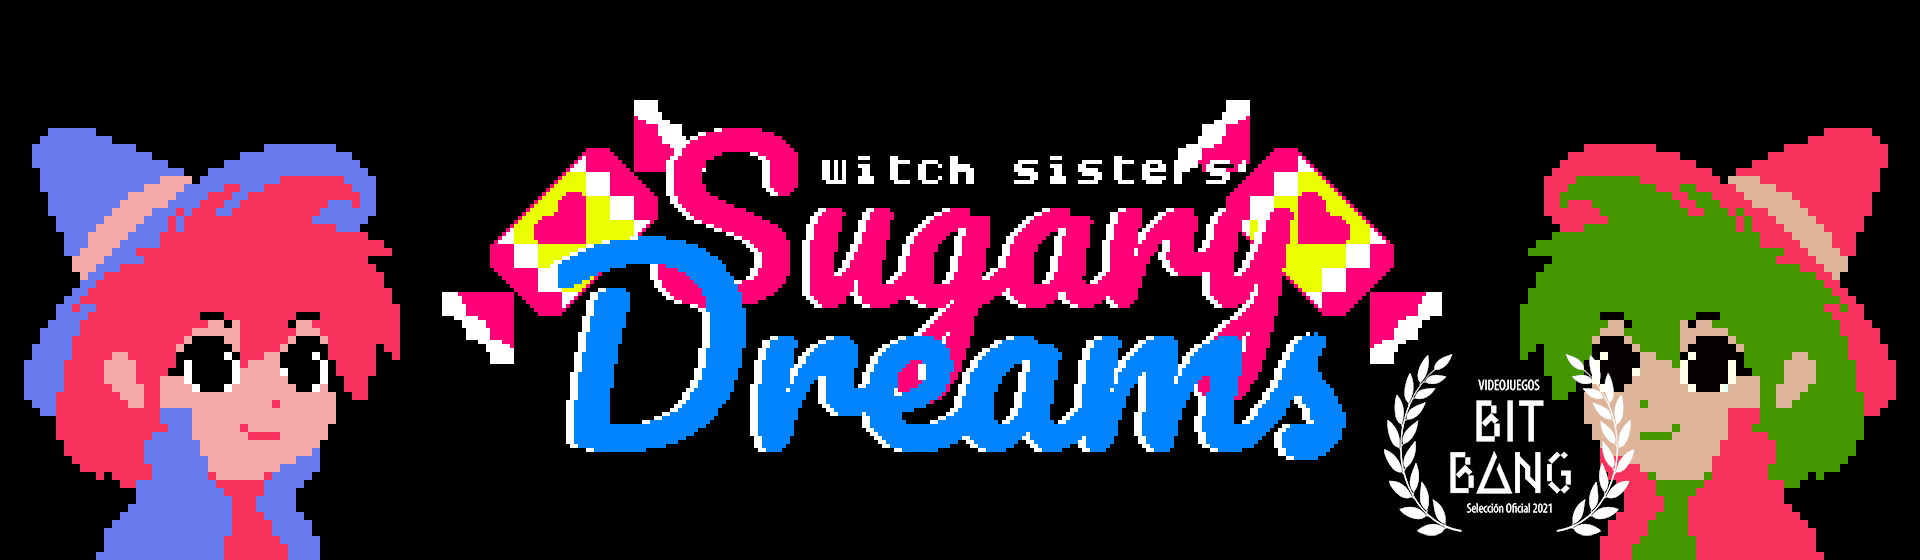 Witch Sisters' Sugary Dreams